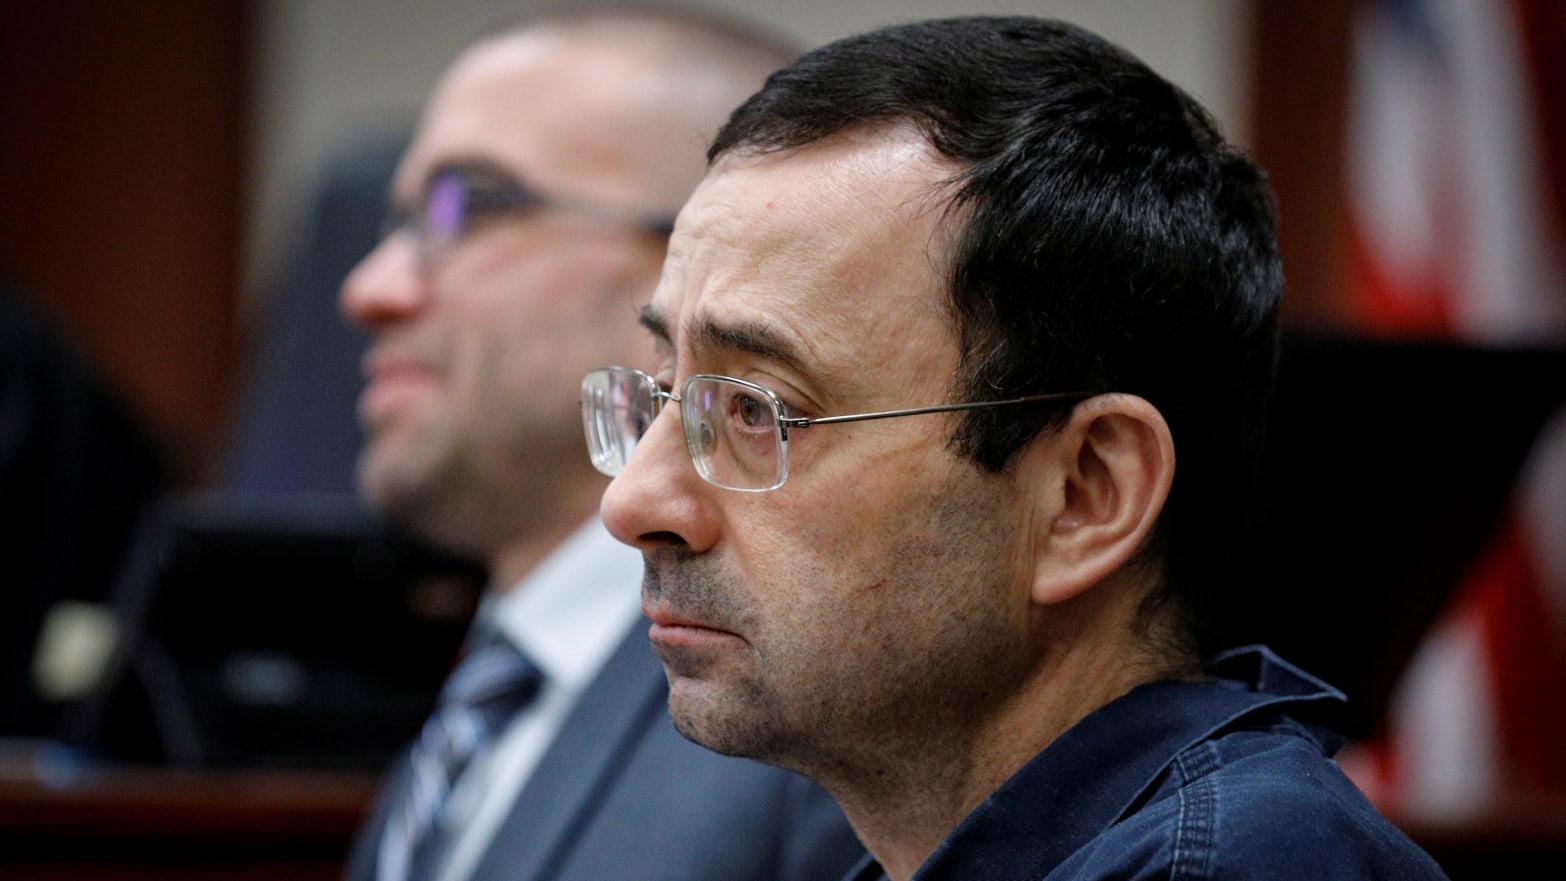 Larry Nassar, the sports doctor convicted of sexually abusing female gymnasts, was stabbed multiple times in United States Penitentiary Coleman in Florida, according a report.